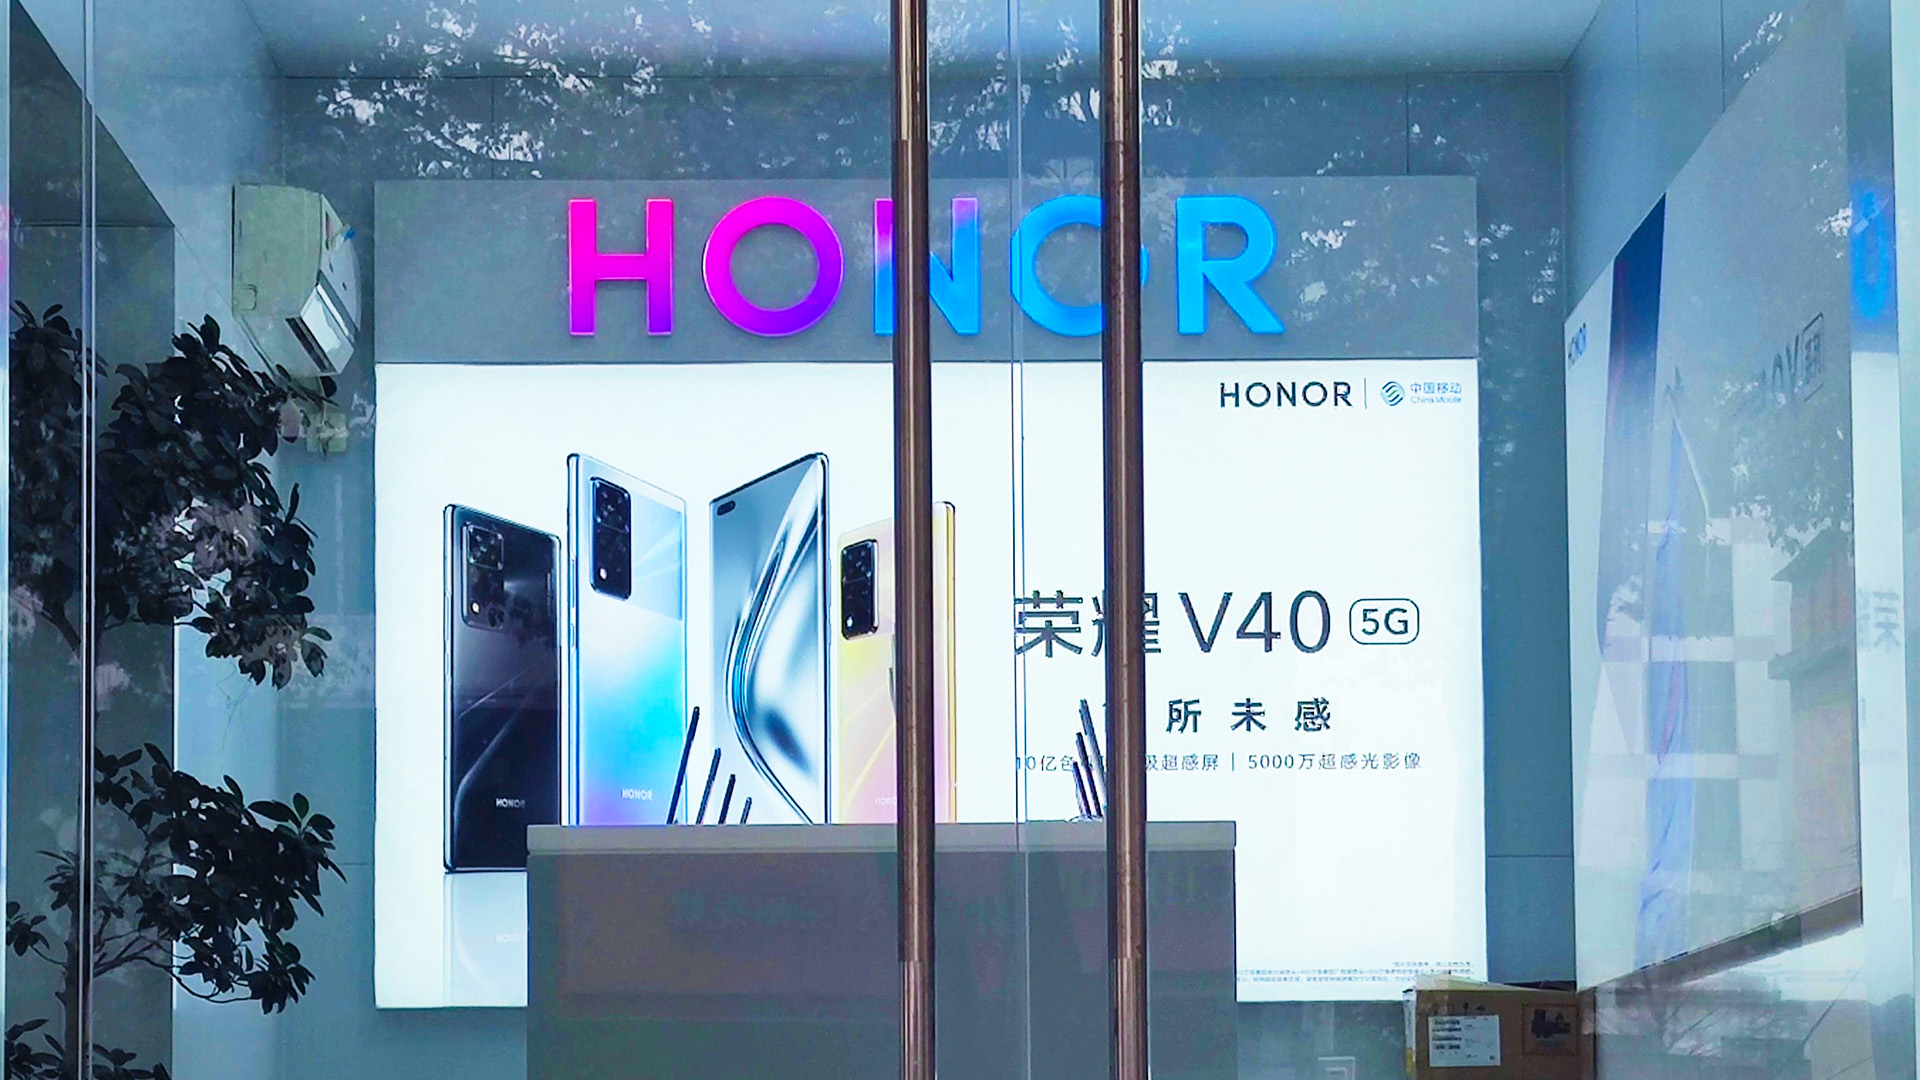 Honor V40 has popped up on Geekbench